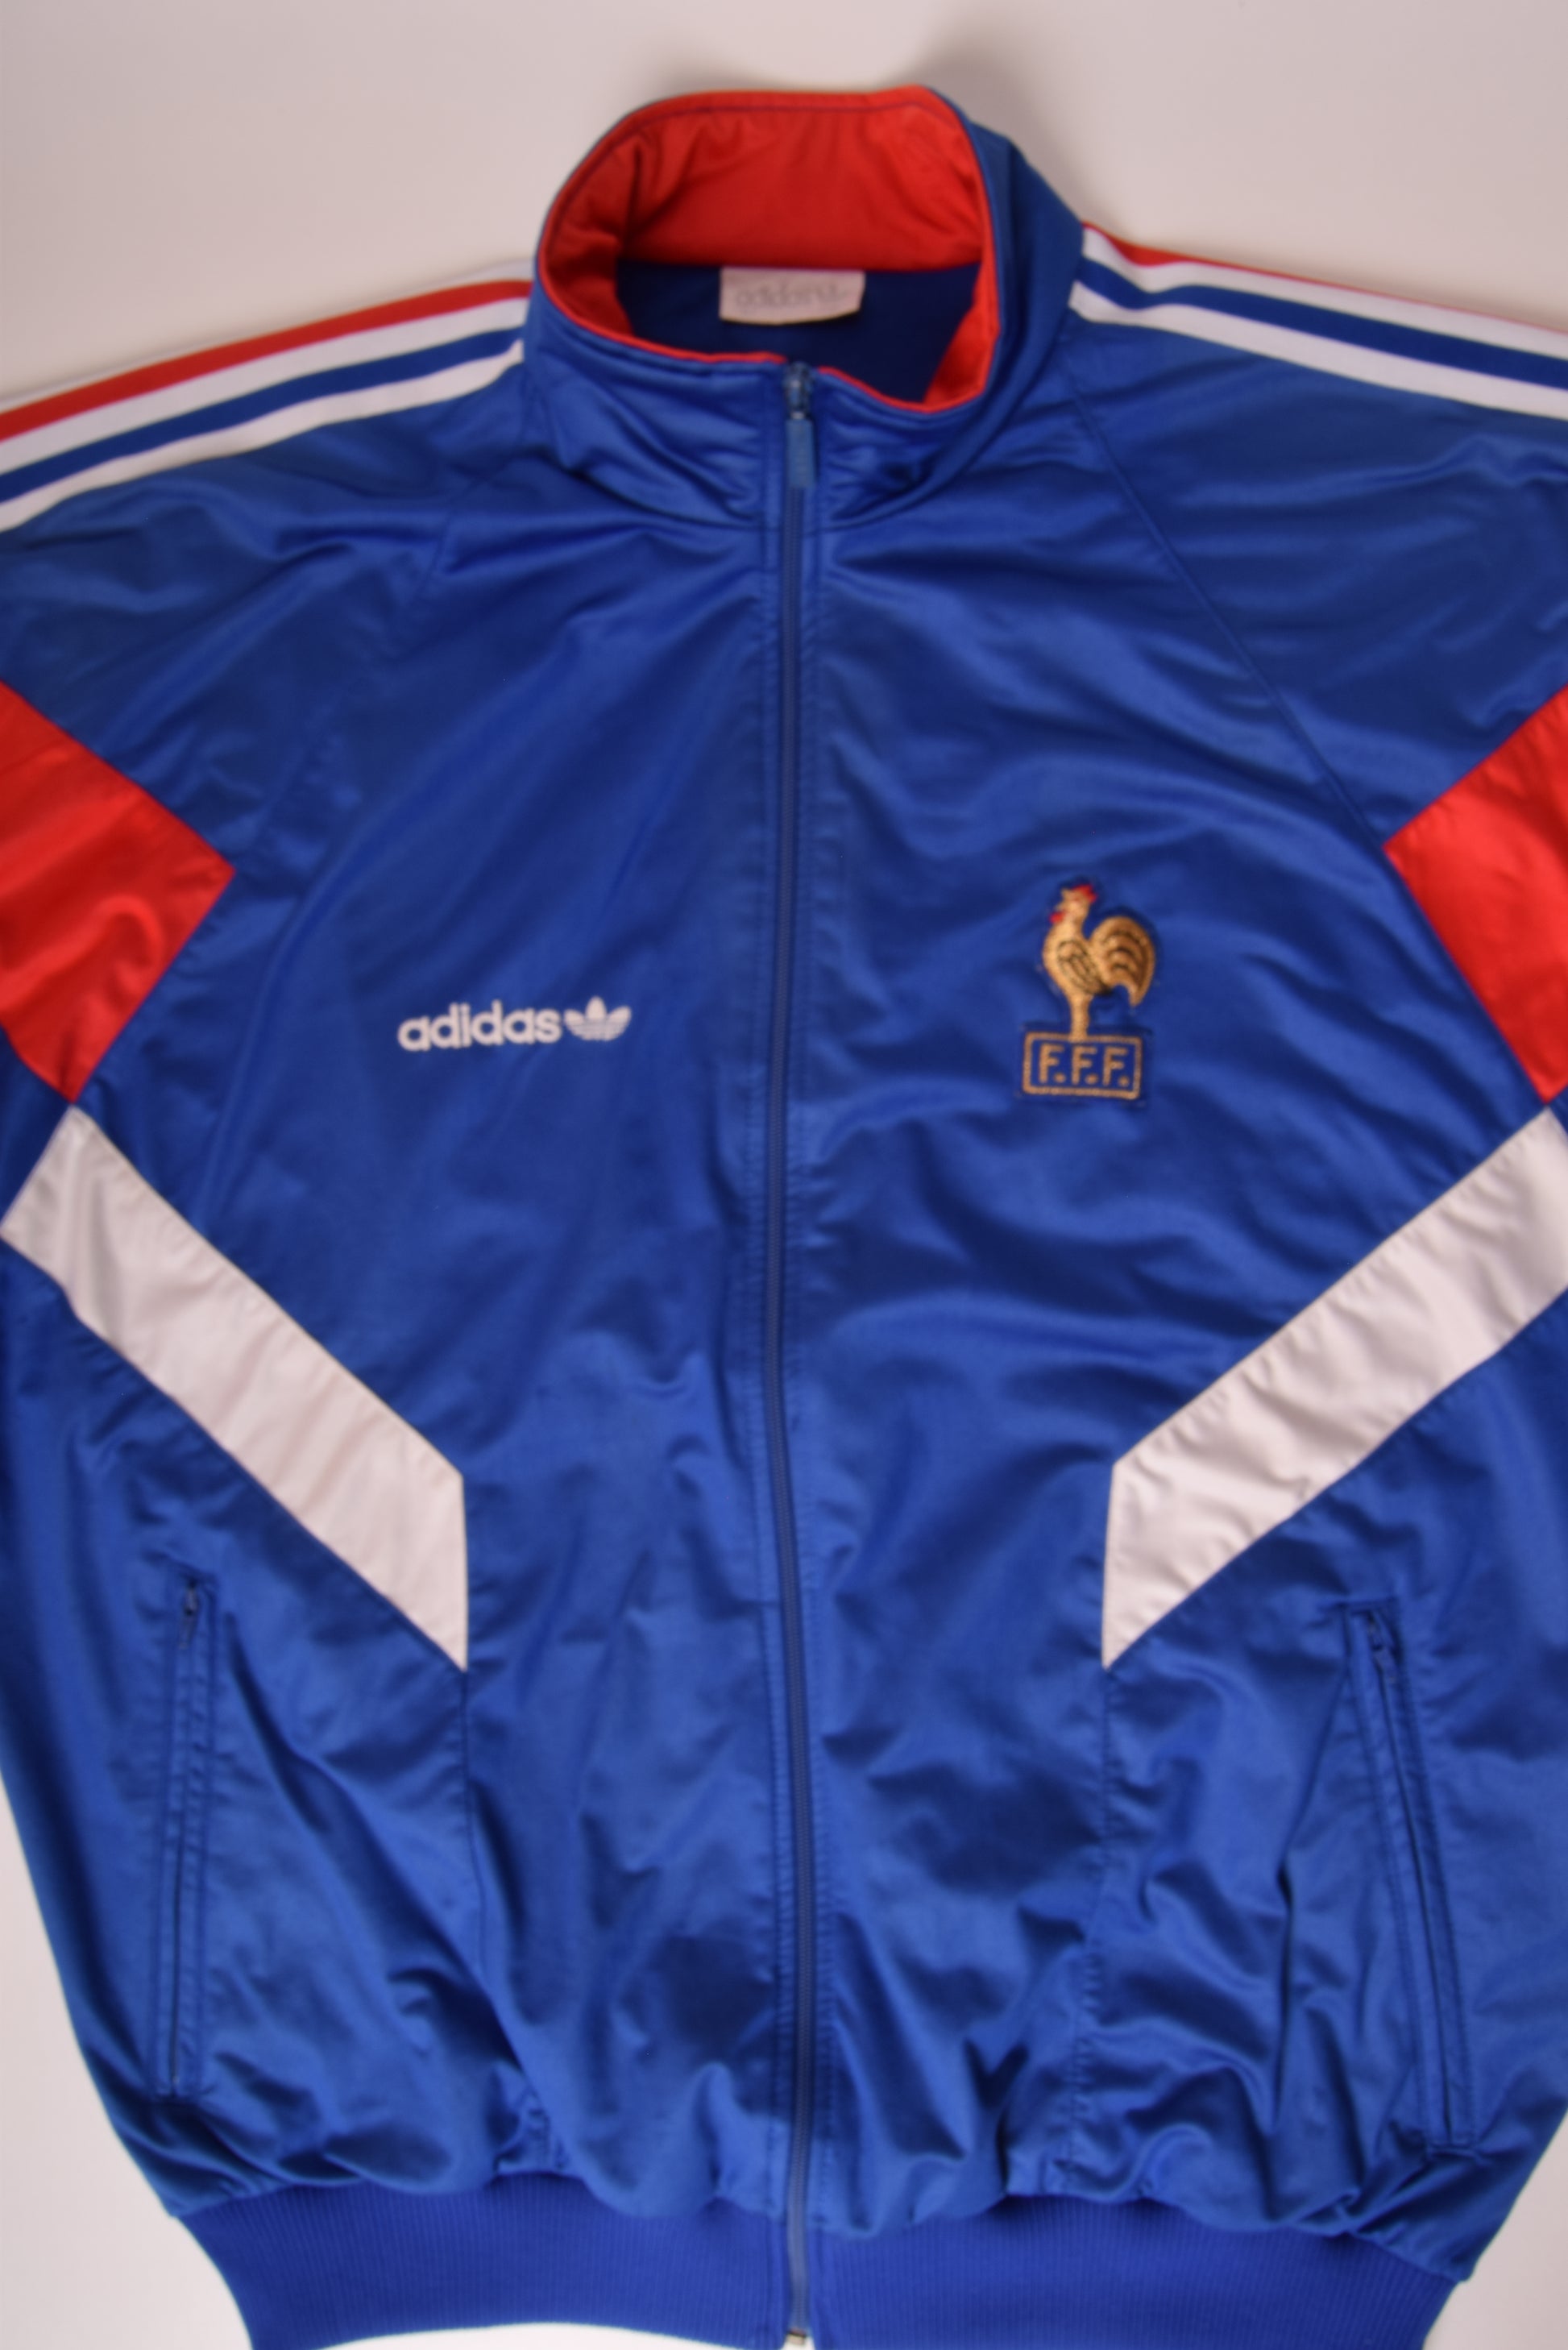 Vintage France Adidas Football Jacket 1990 - 1992 Made in France Size L Blue Red White